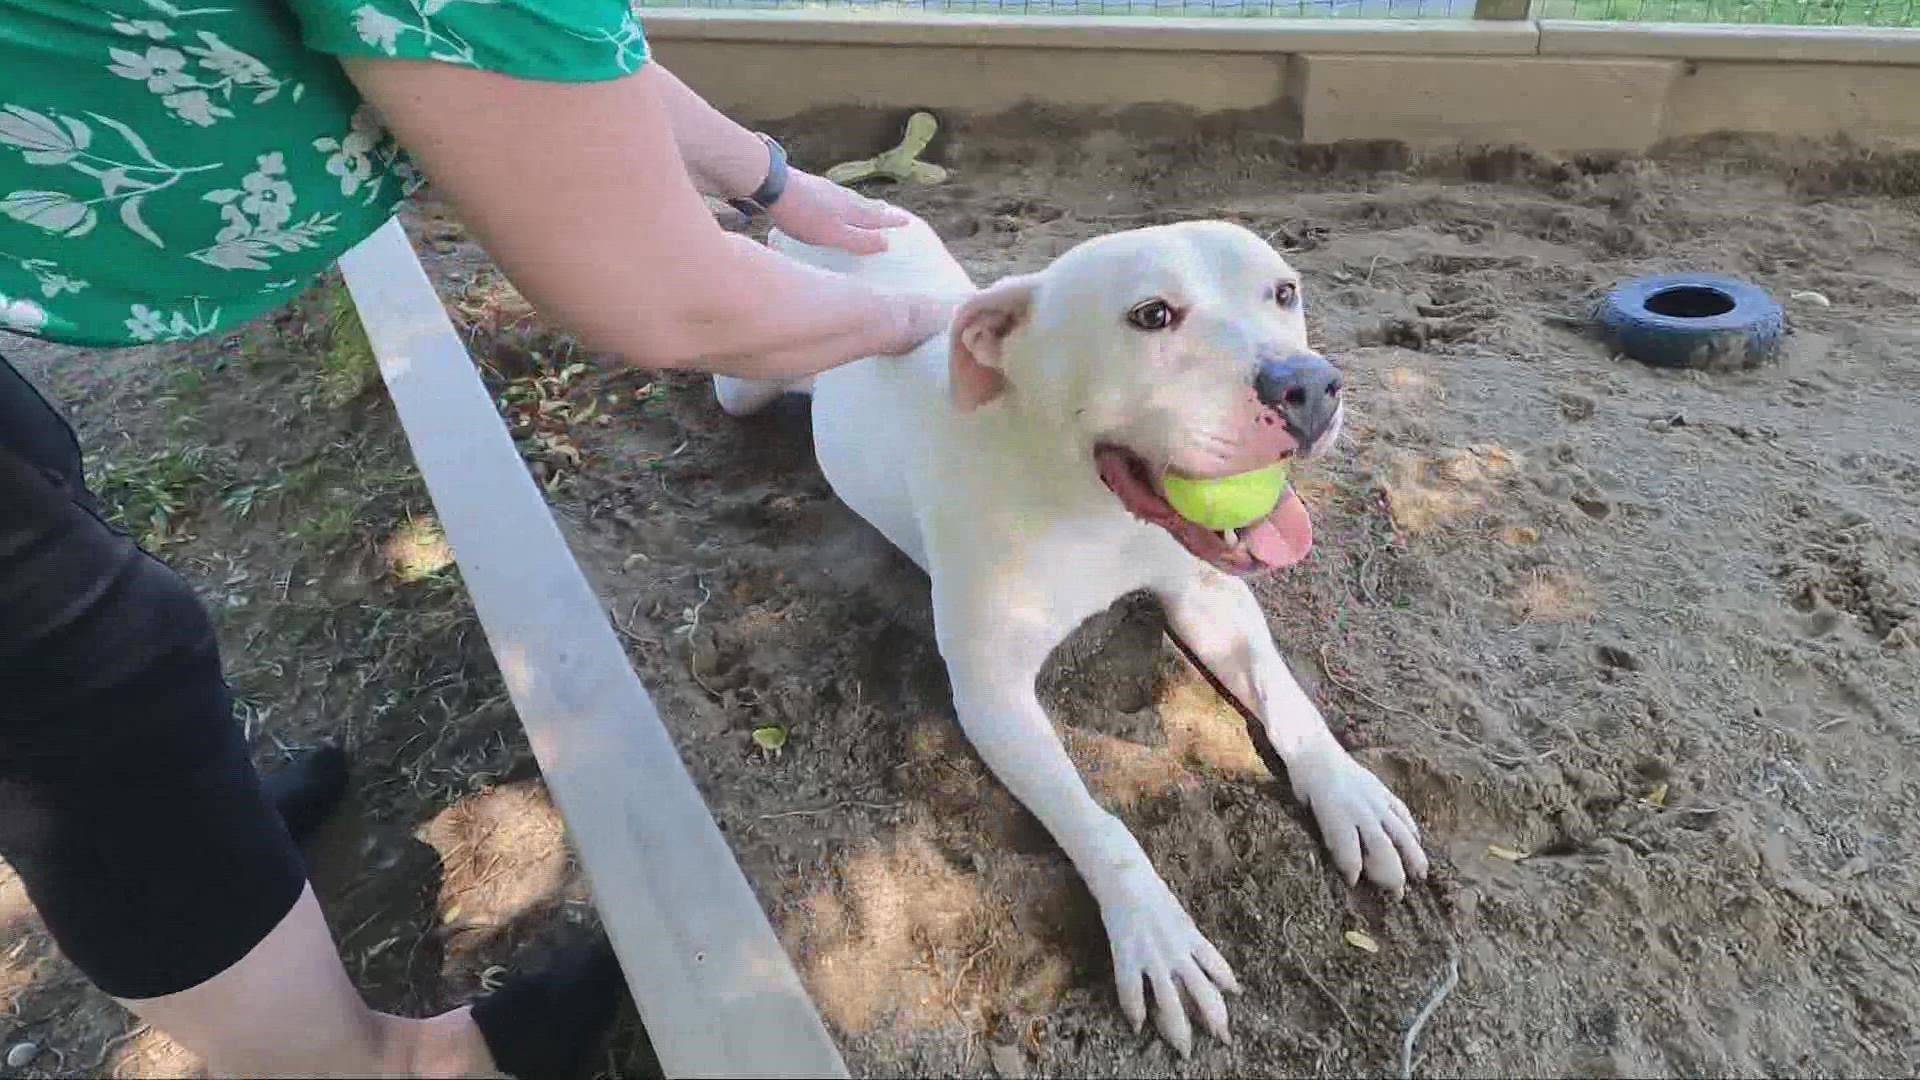 He's been living in a shelter for three years, but Bryn is definitely ready for adoption.